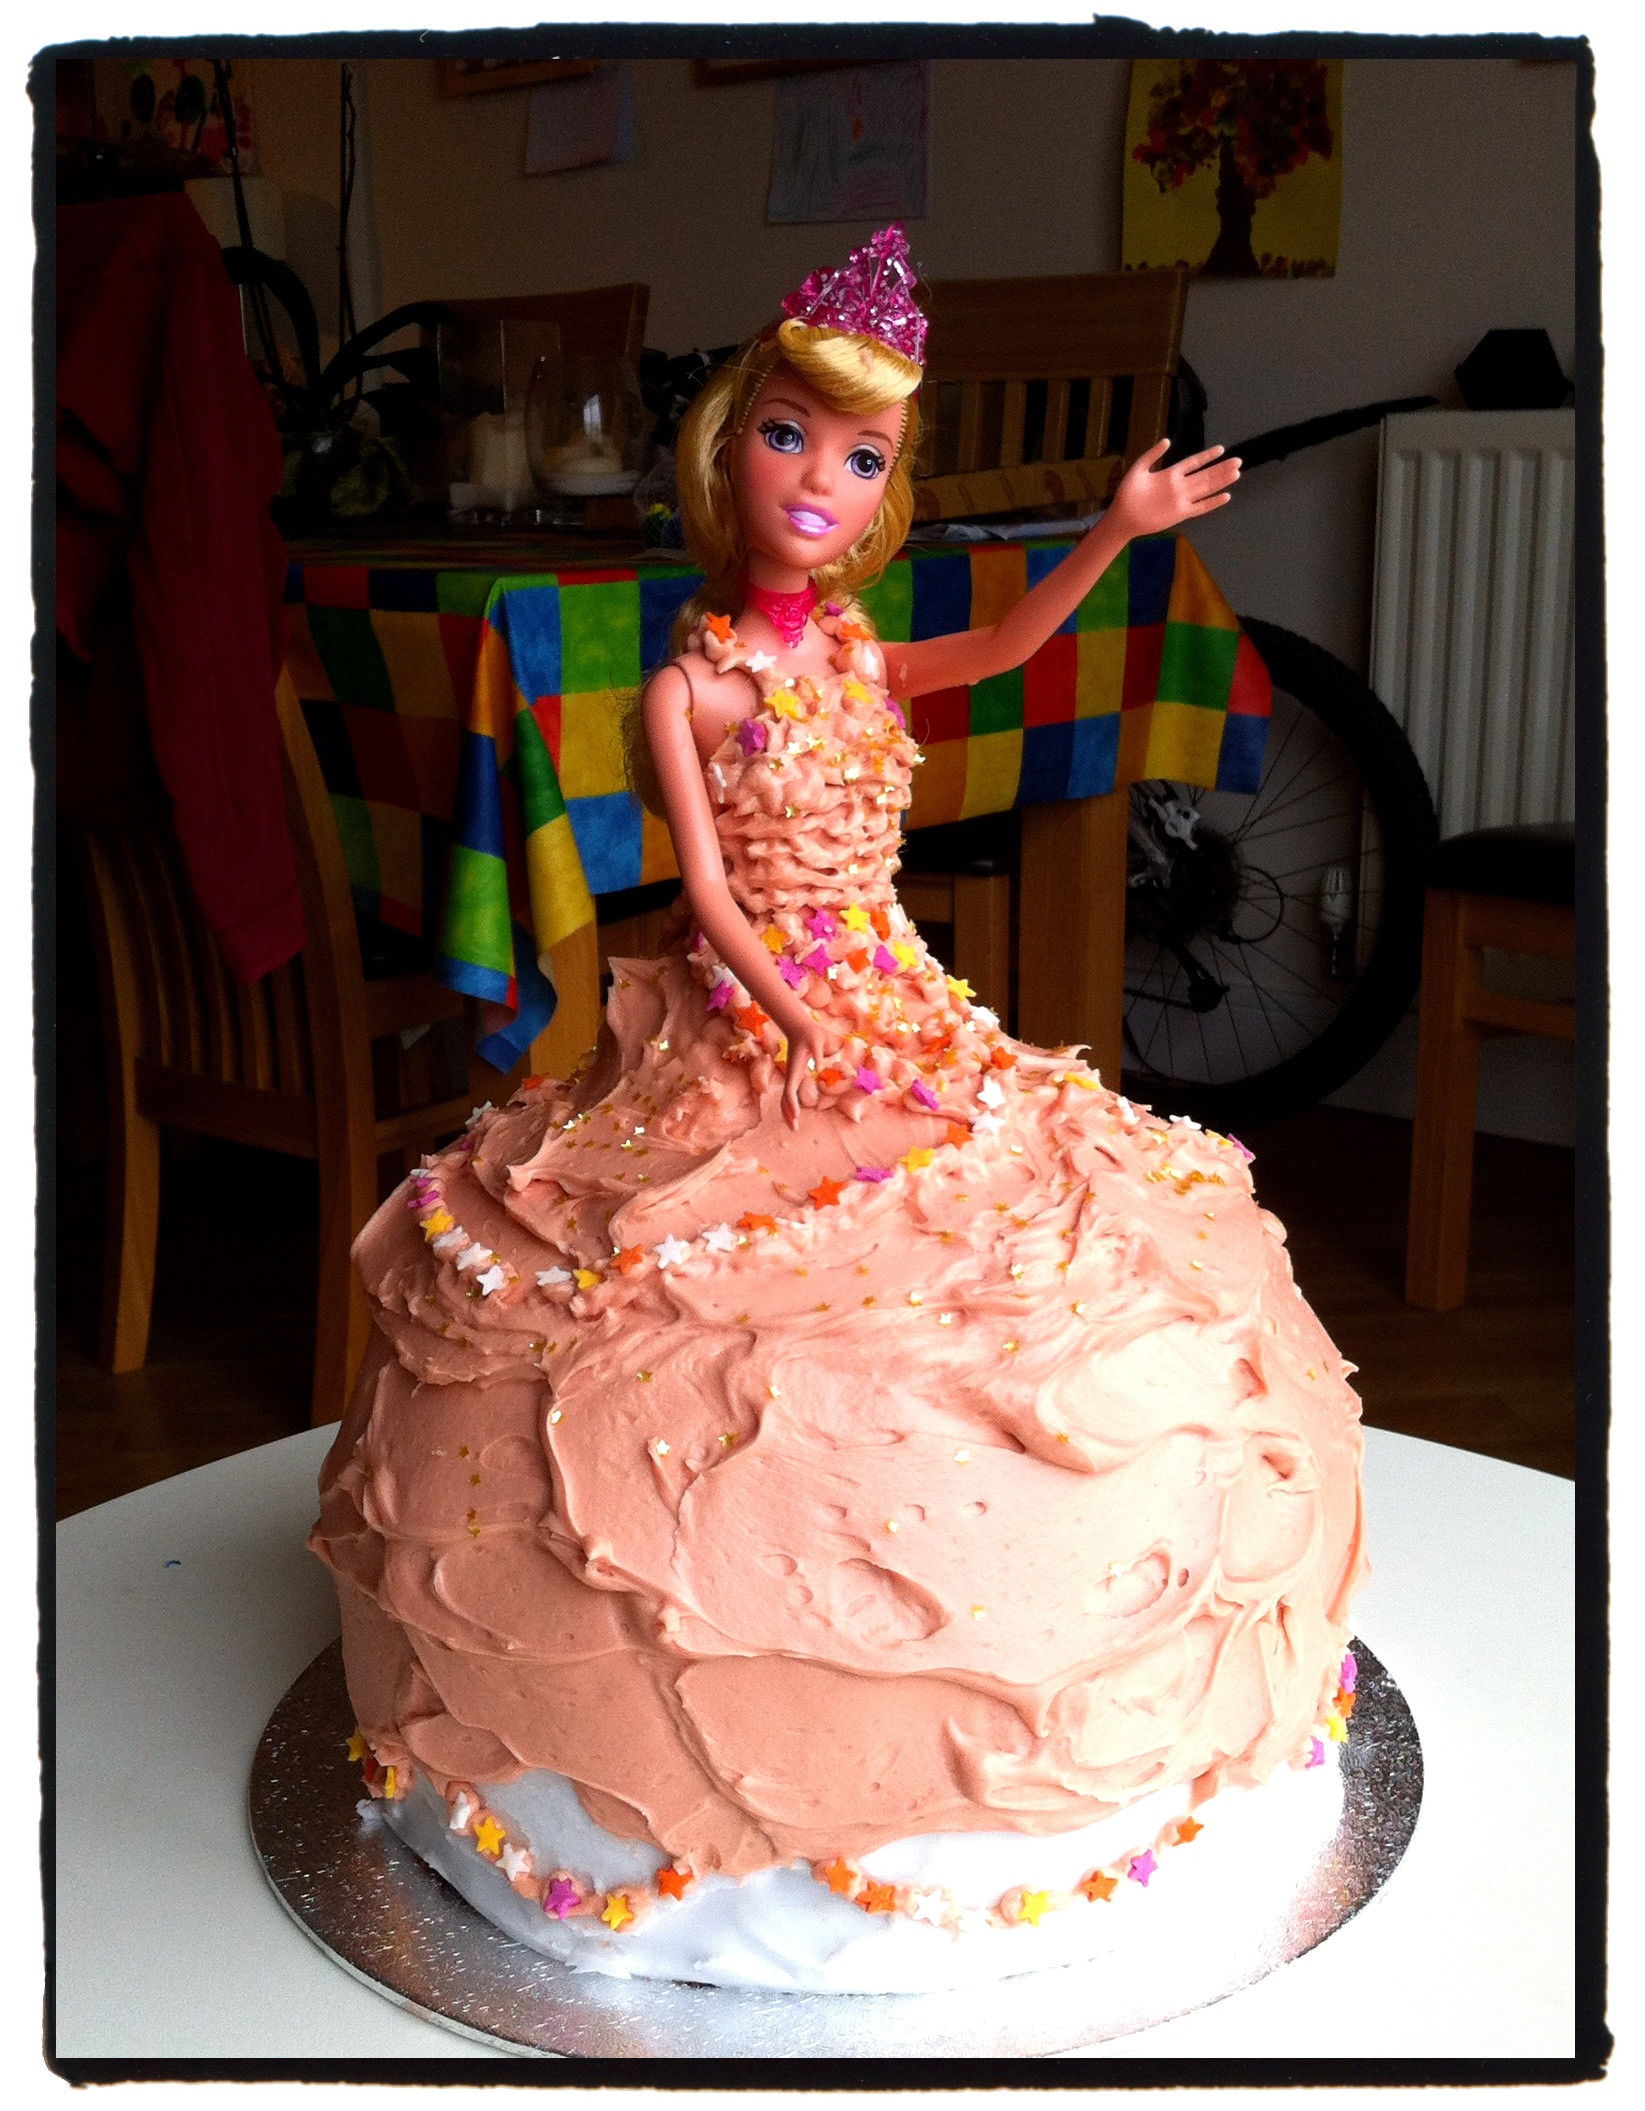 How To Make Birthday Cake
 How to make a Princess Birthday Cake from scratch